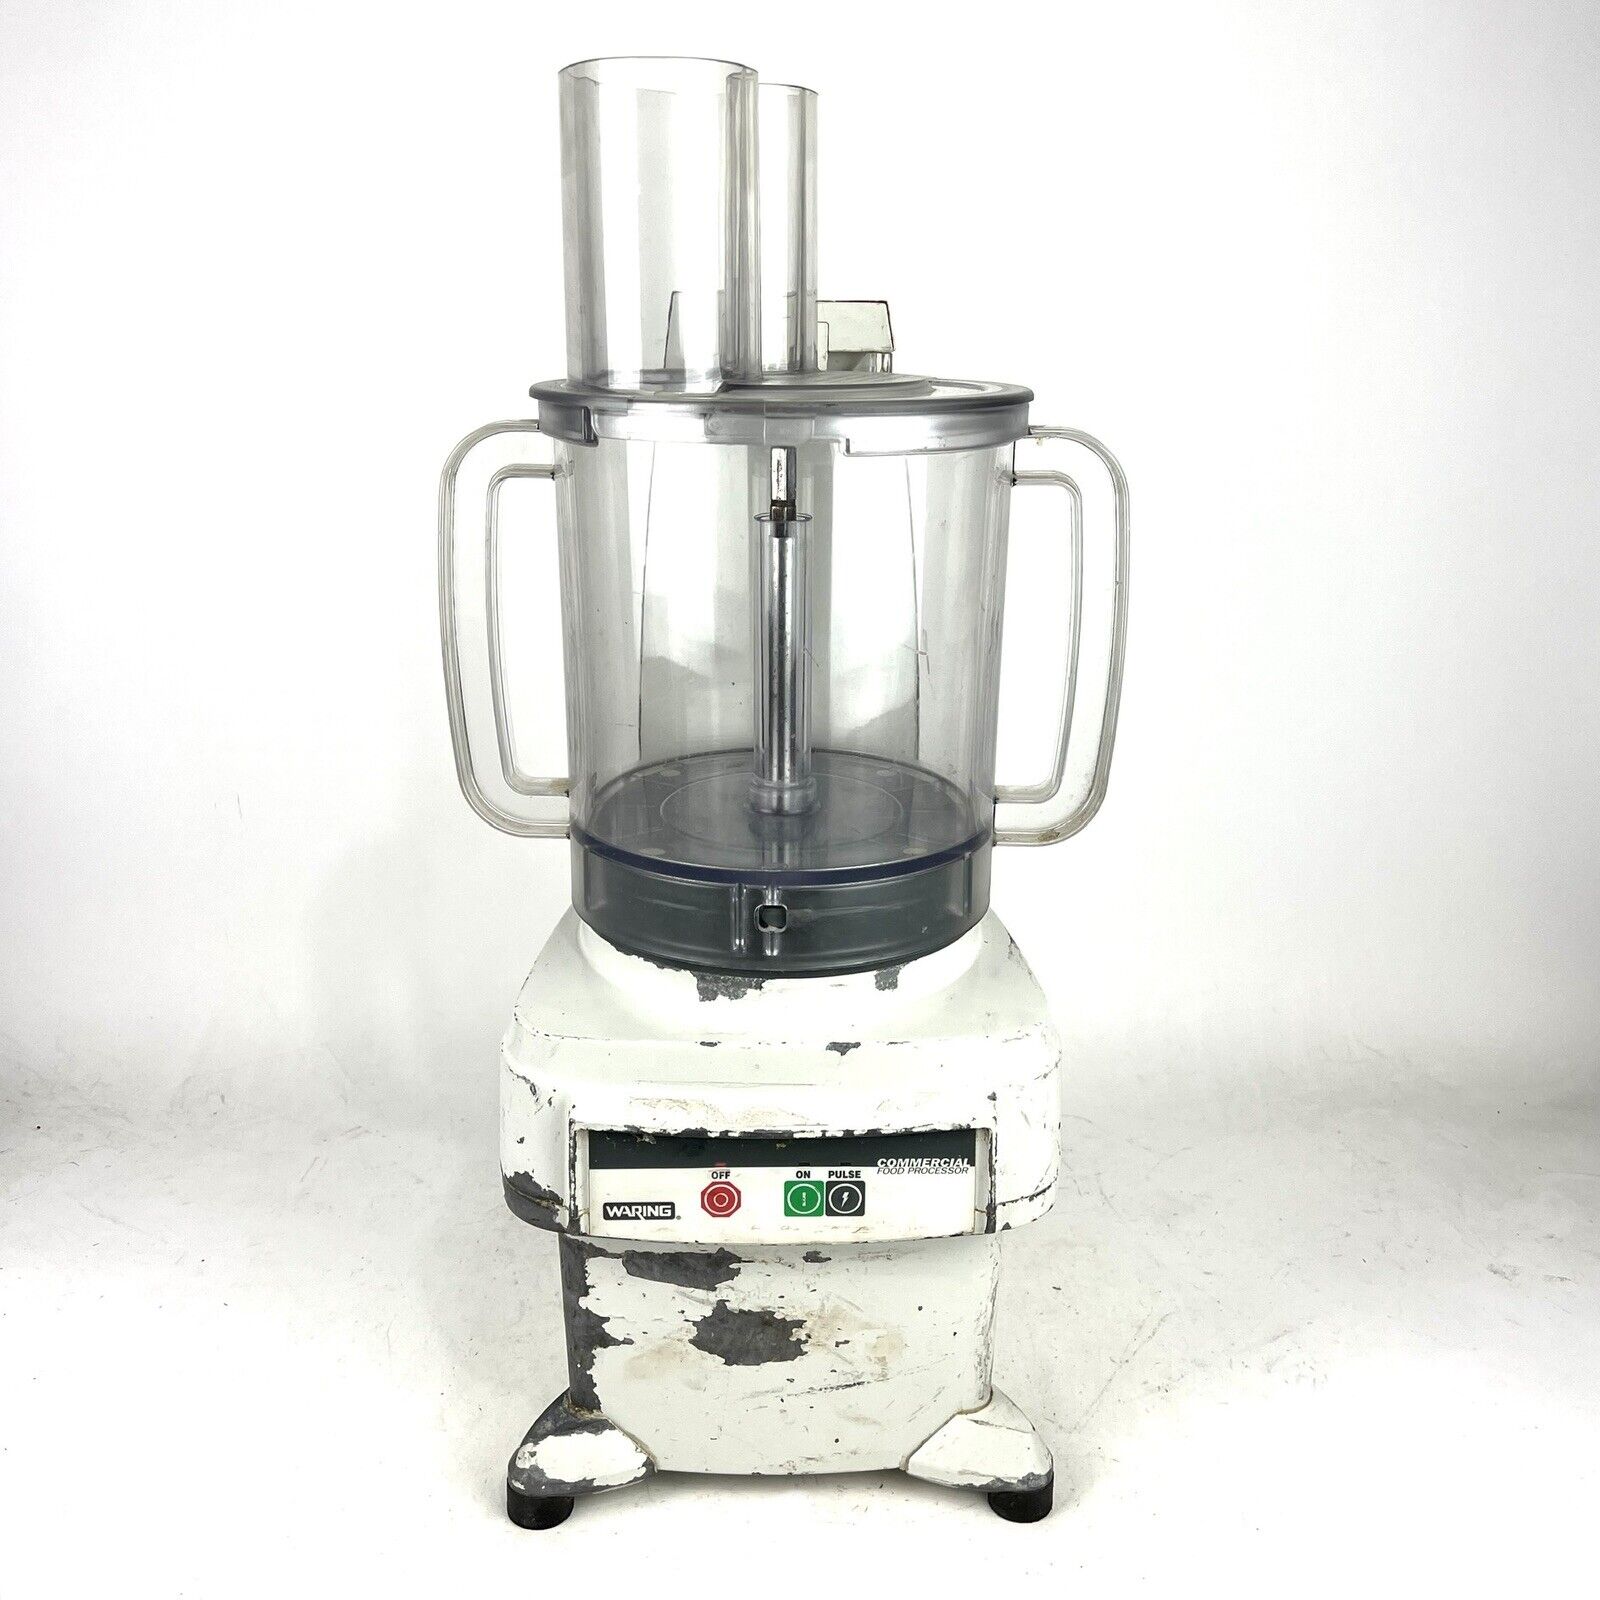 Waring Commercial Heavy Duty Food Processor FP2000 Restaurant Tested